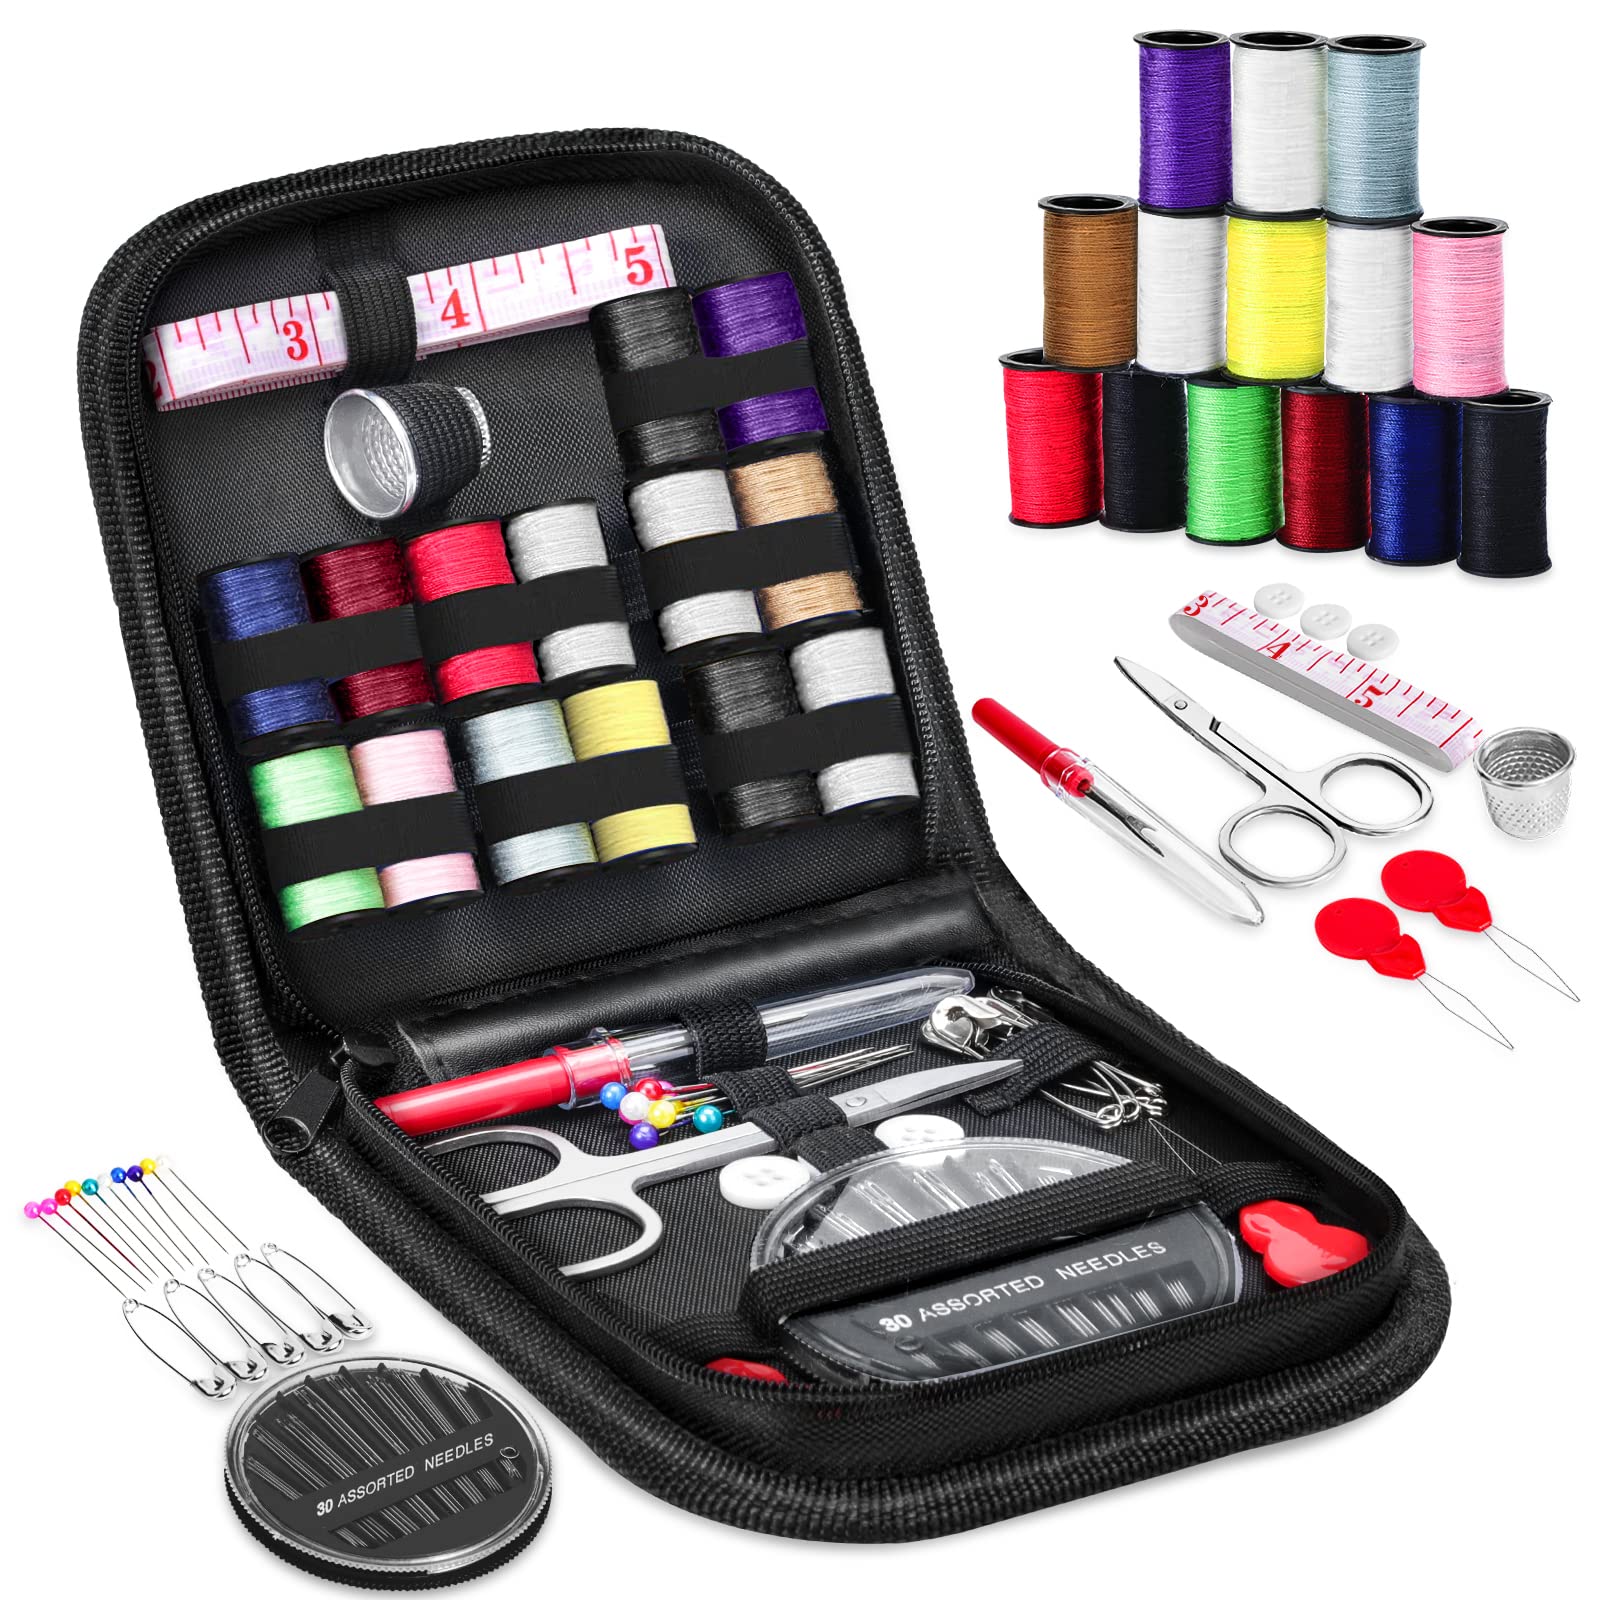 Sewing Kit for Adults and Kids, Basic Needle and Thread Kit Product for  Small Fixes, Mini Travel Sewing Kit for Emergency Repairs